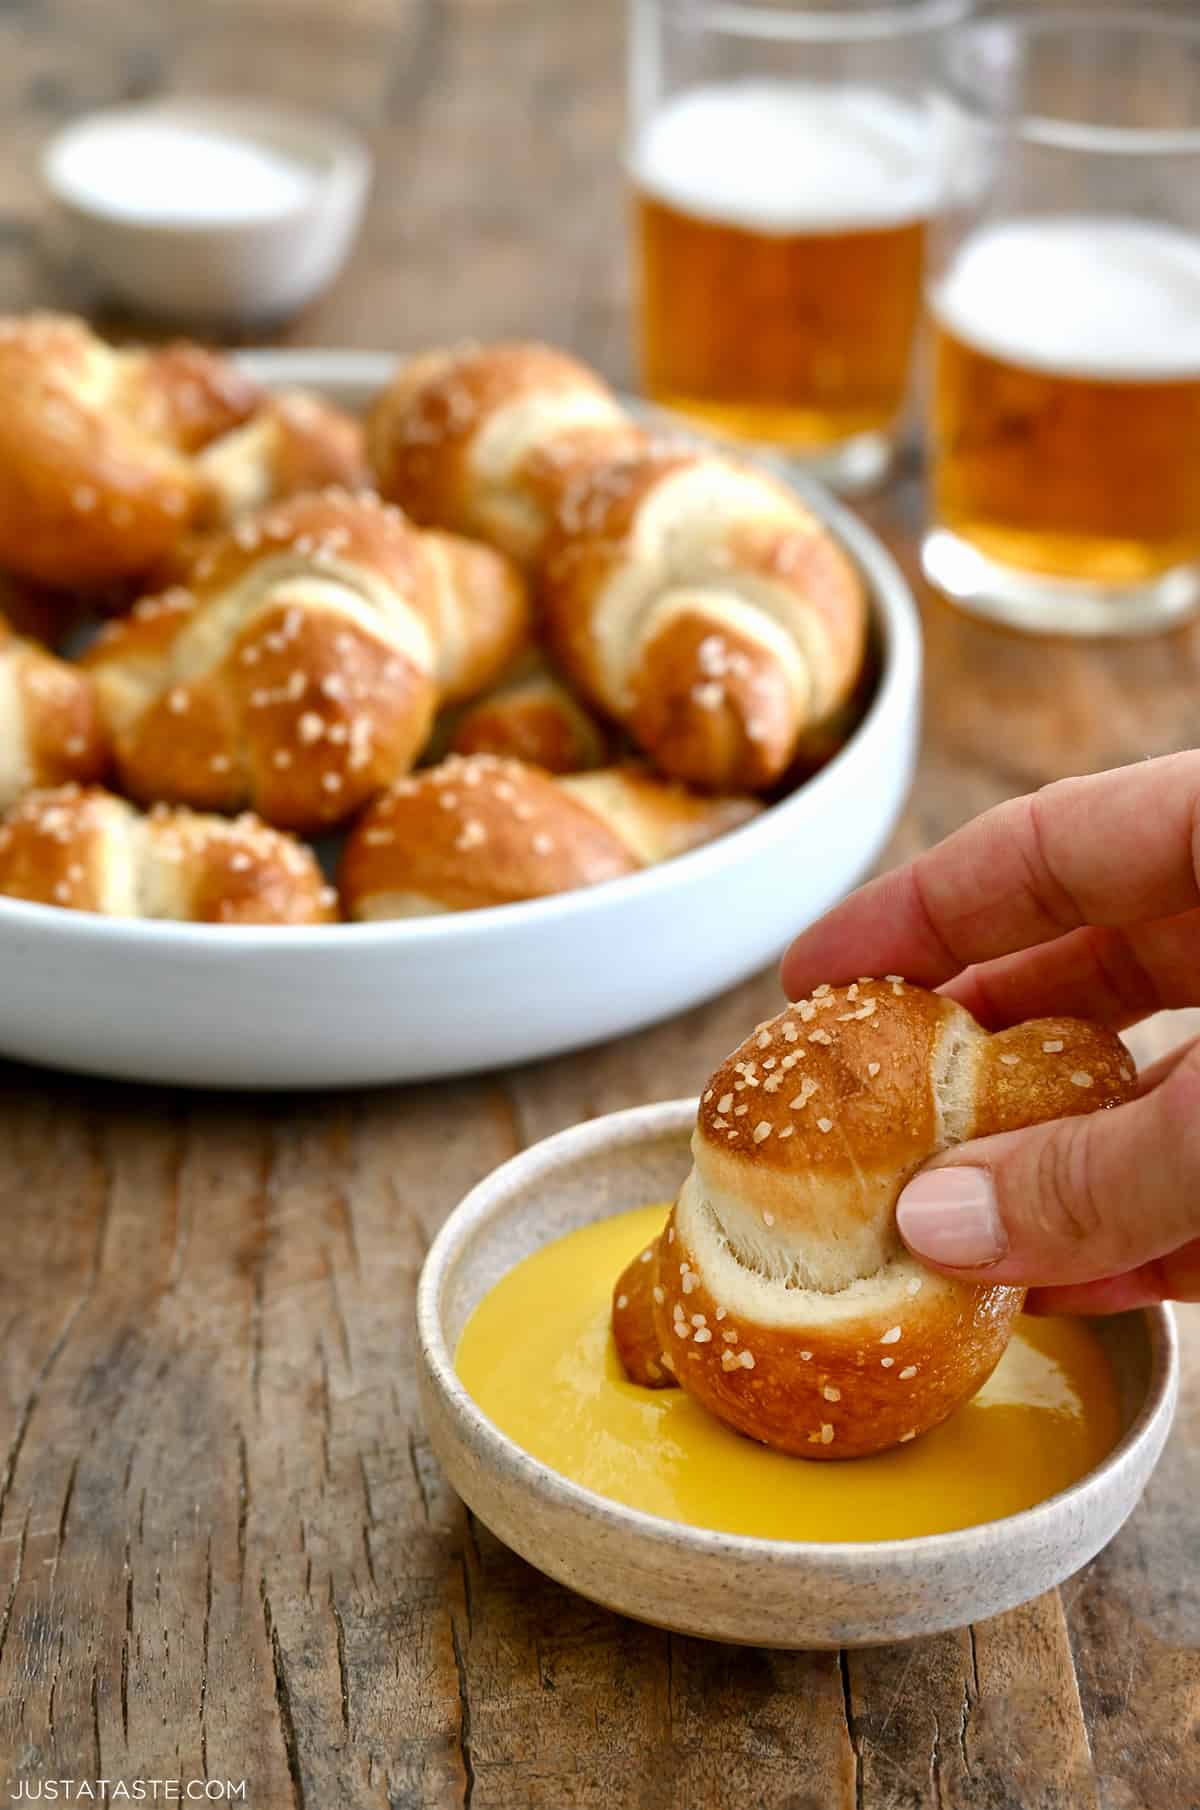 A hand holding a pizza dough soft pretzel knot dips it into cheese sauce. A bowl with soft pretzel knots is in the background.